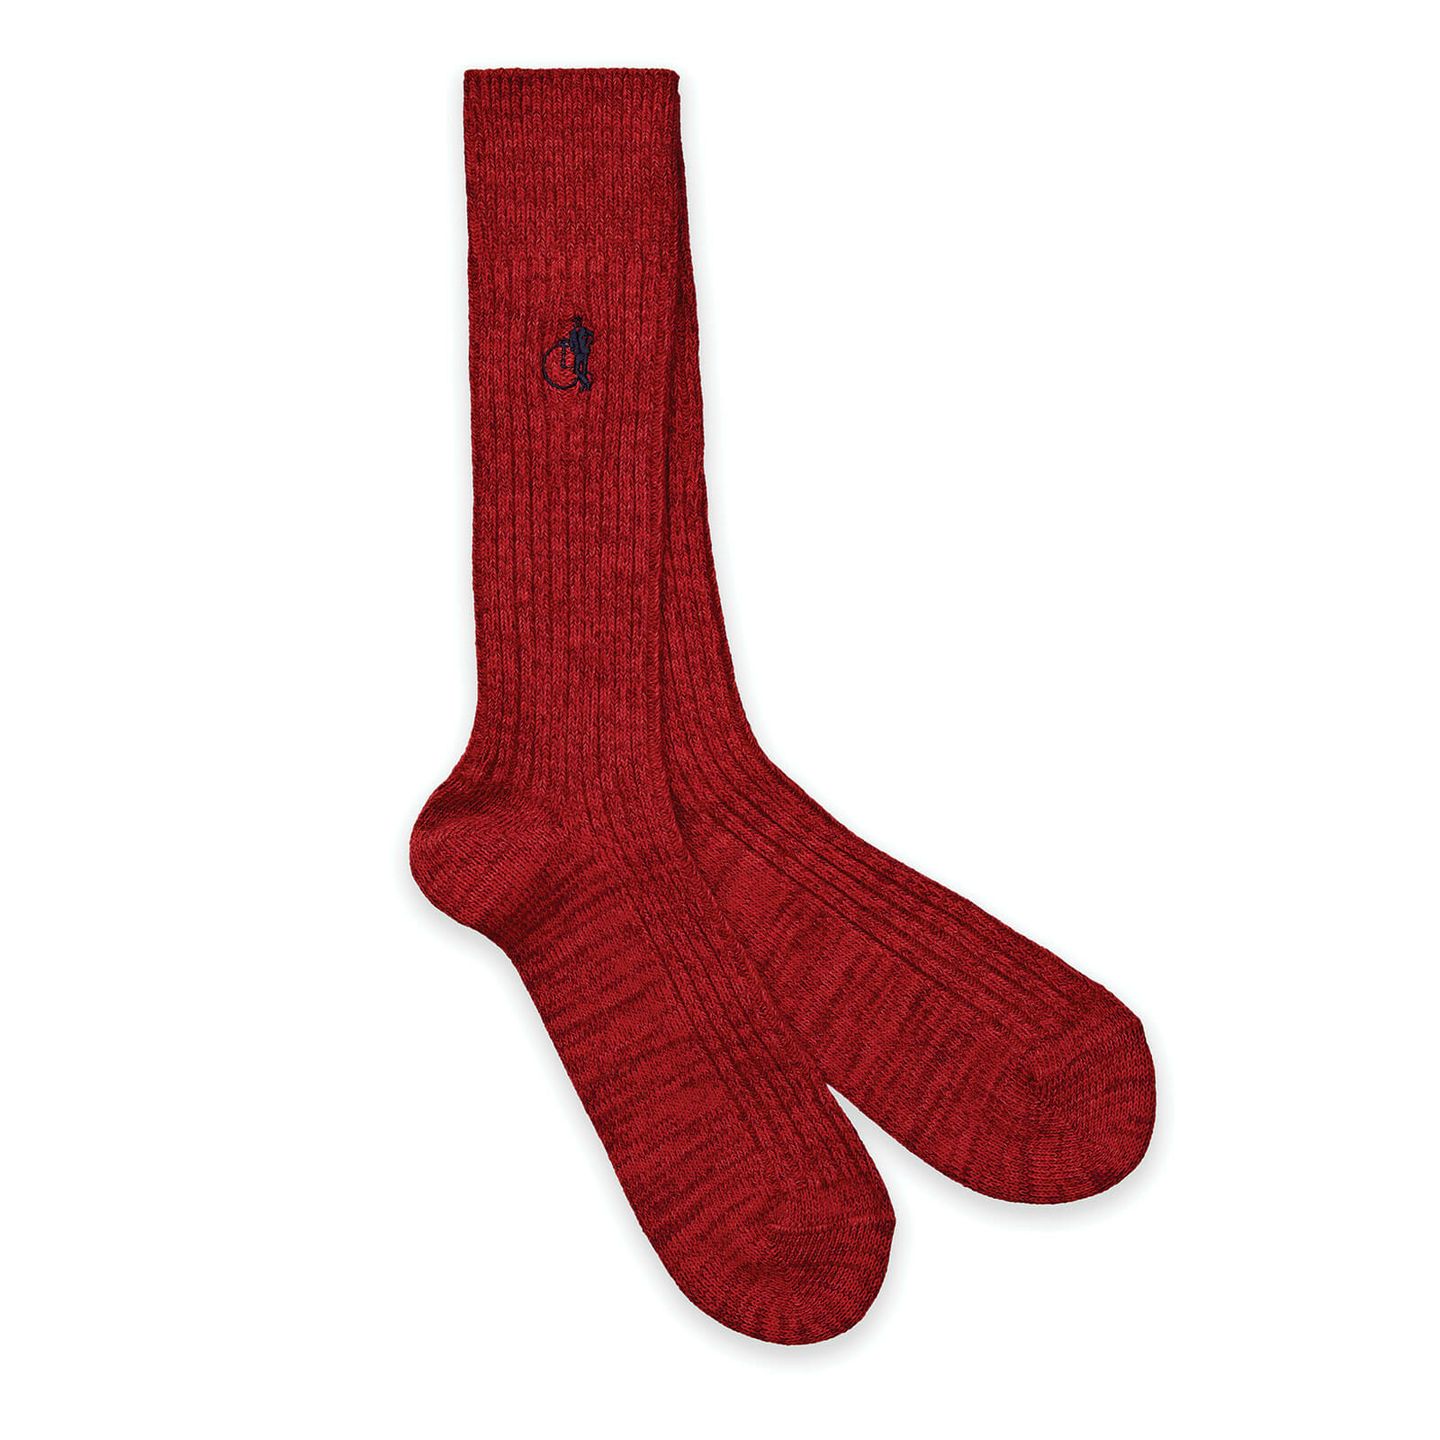 A pair of ruby red boot socks